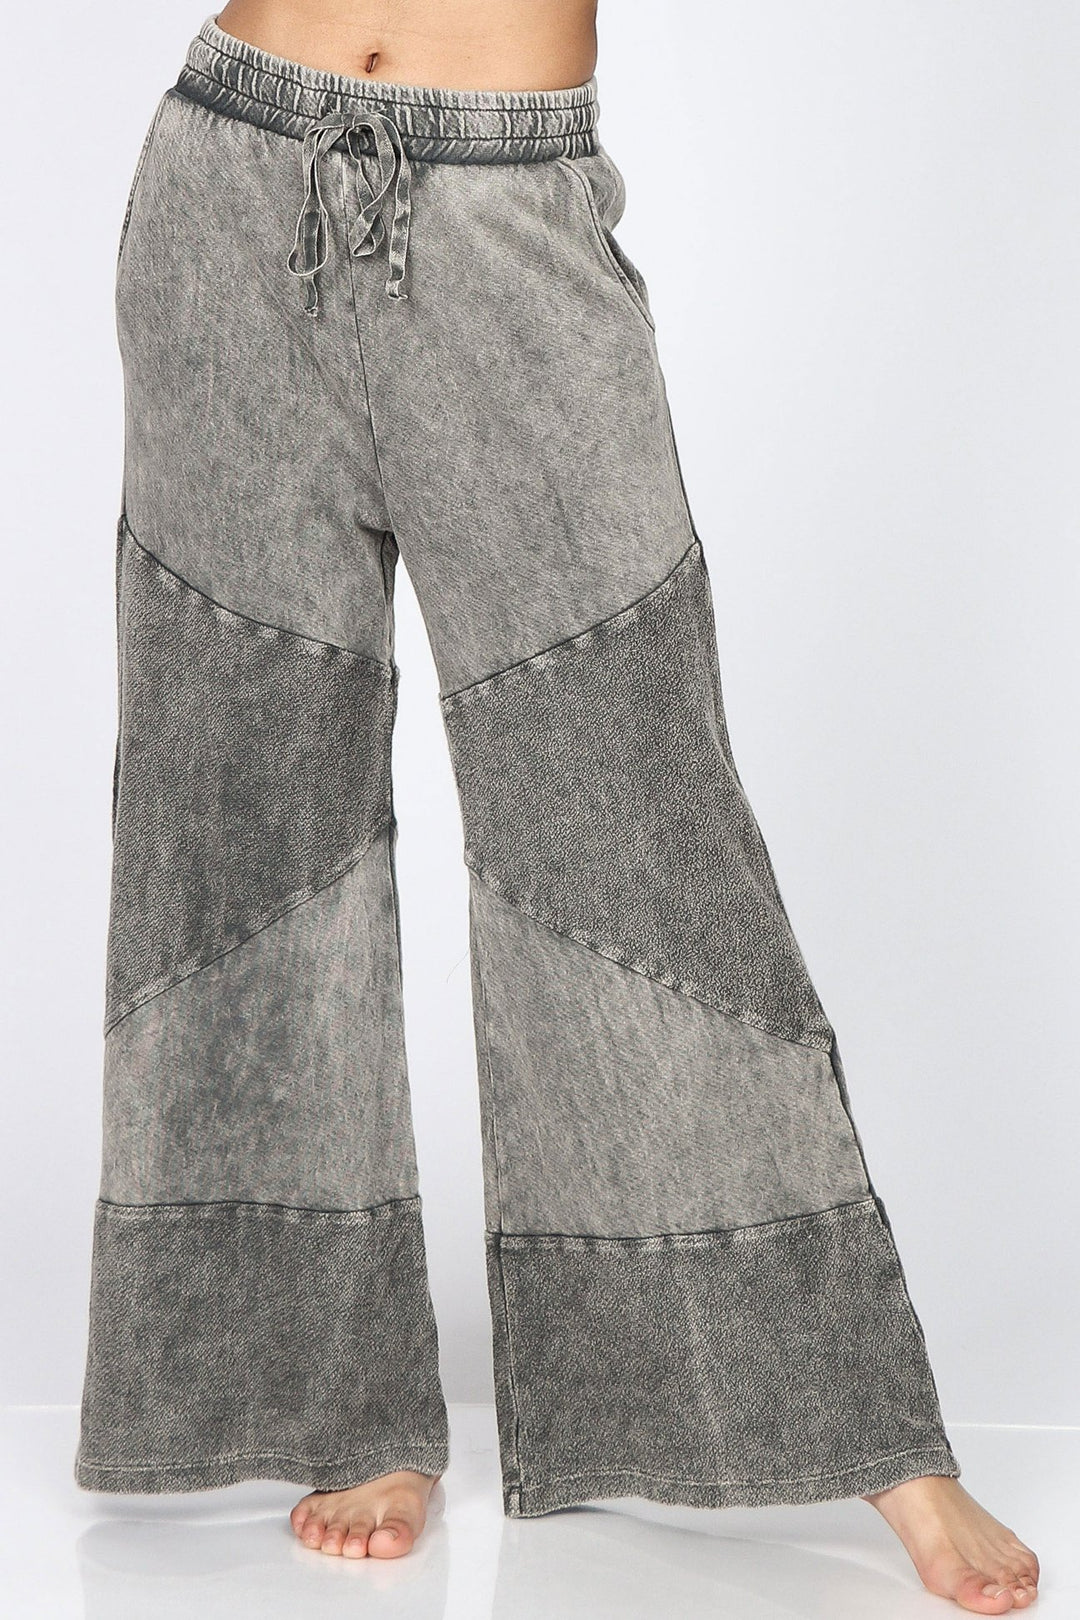 MINERAL WASH FRENCH TERRY PALAZZO PANTS - Kingfisher Road - Online Boutique